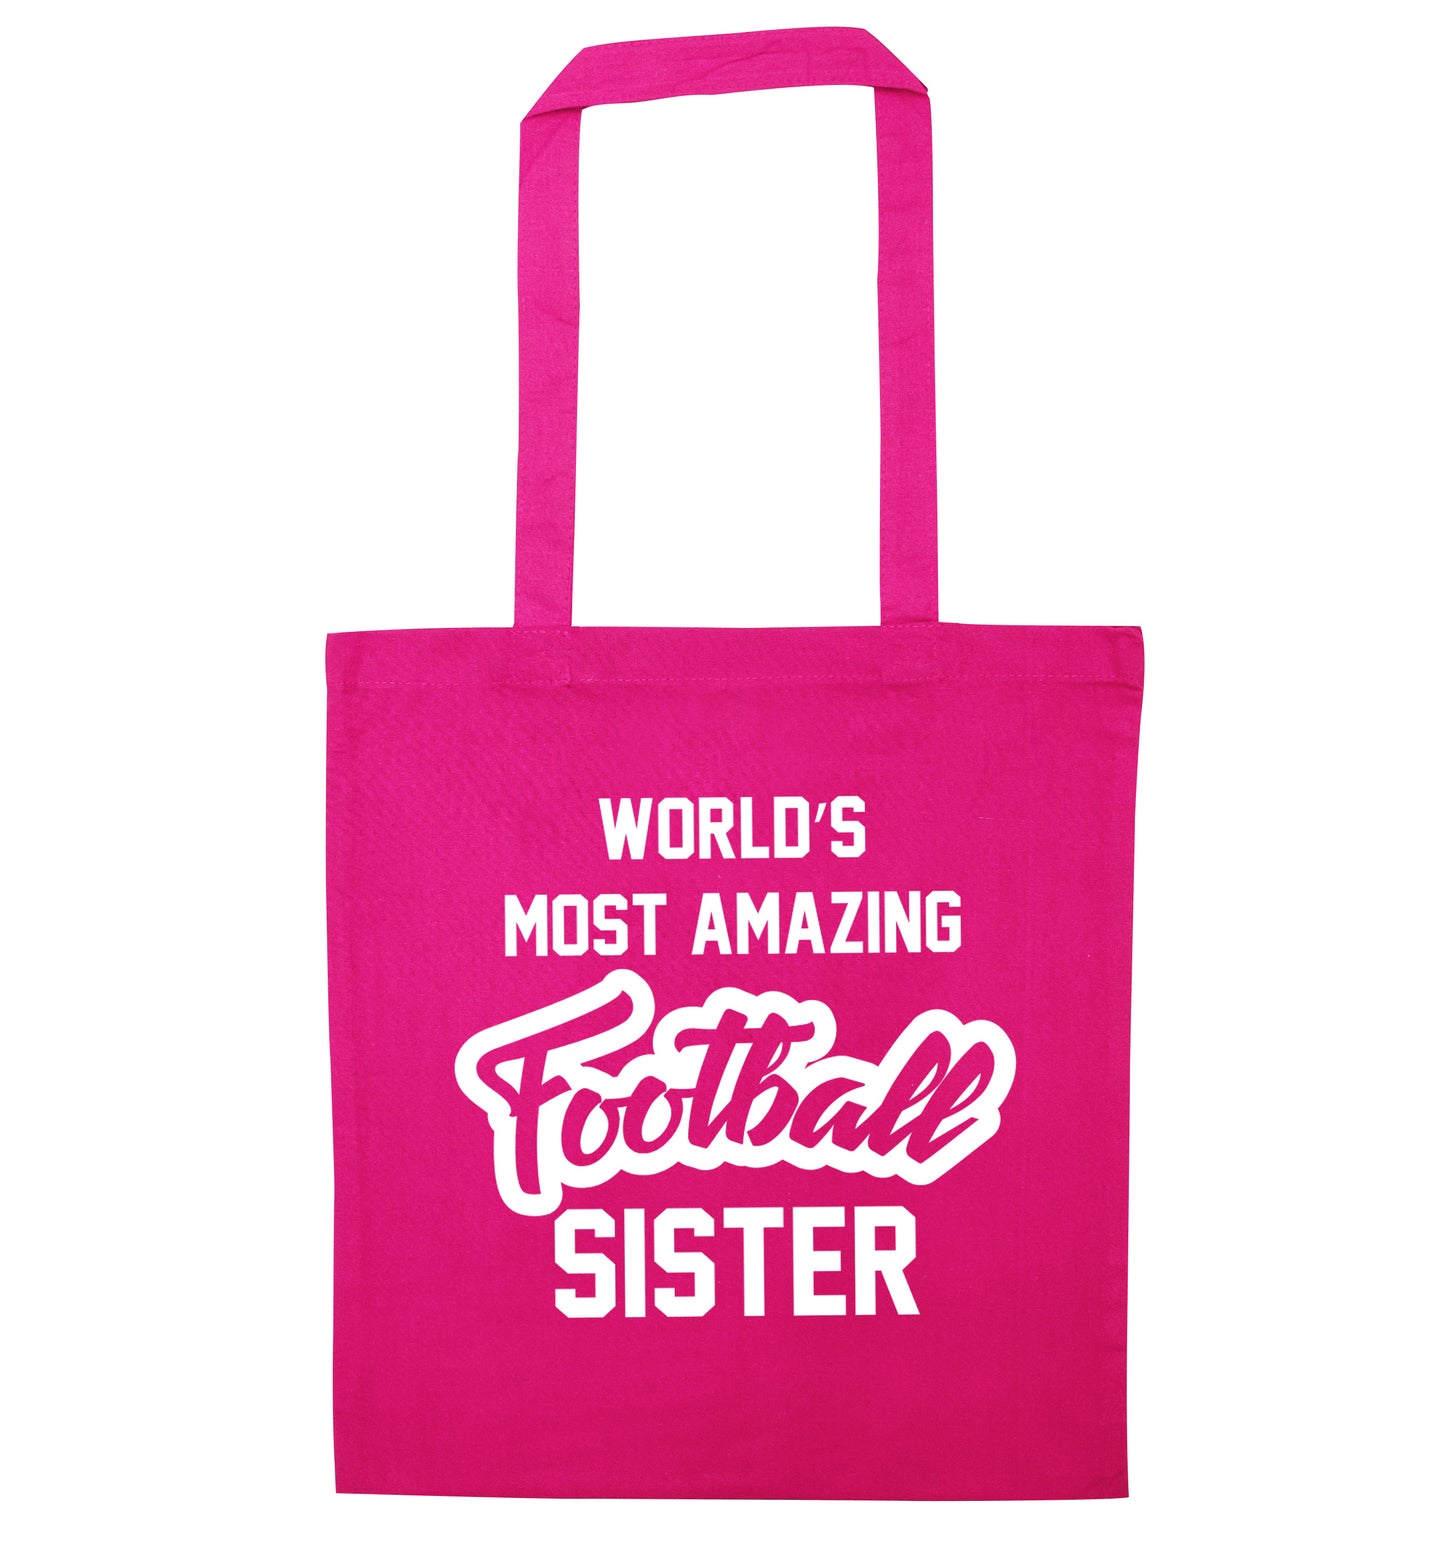 Worlds most amazing football sister pink tote bag